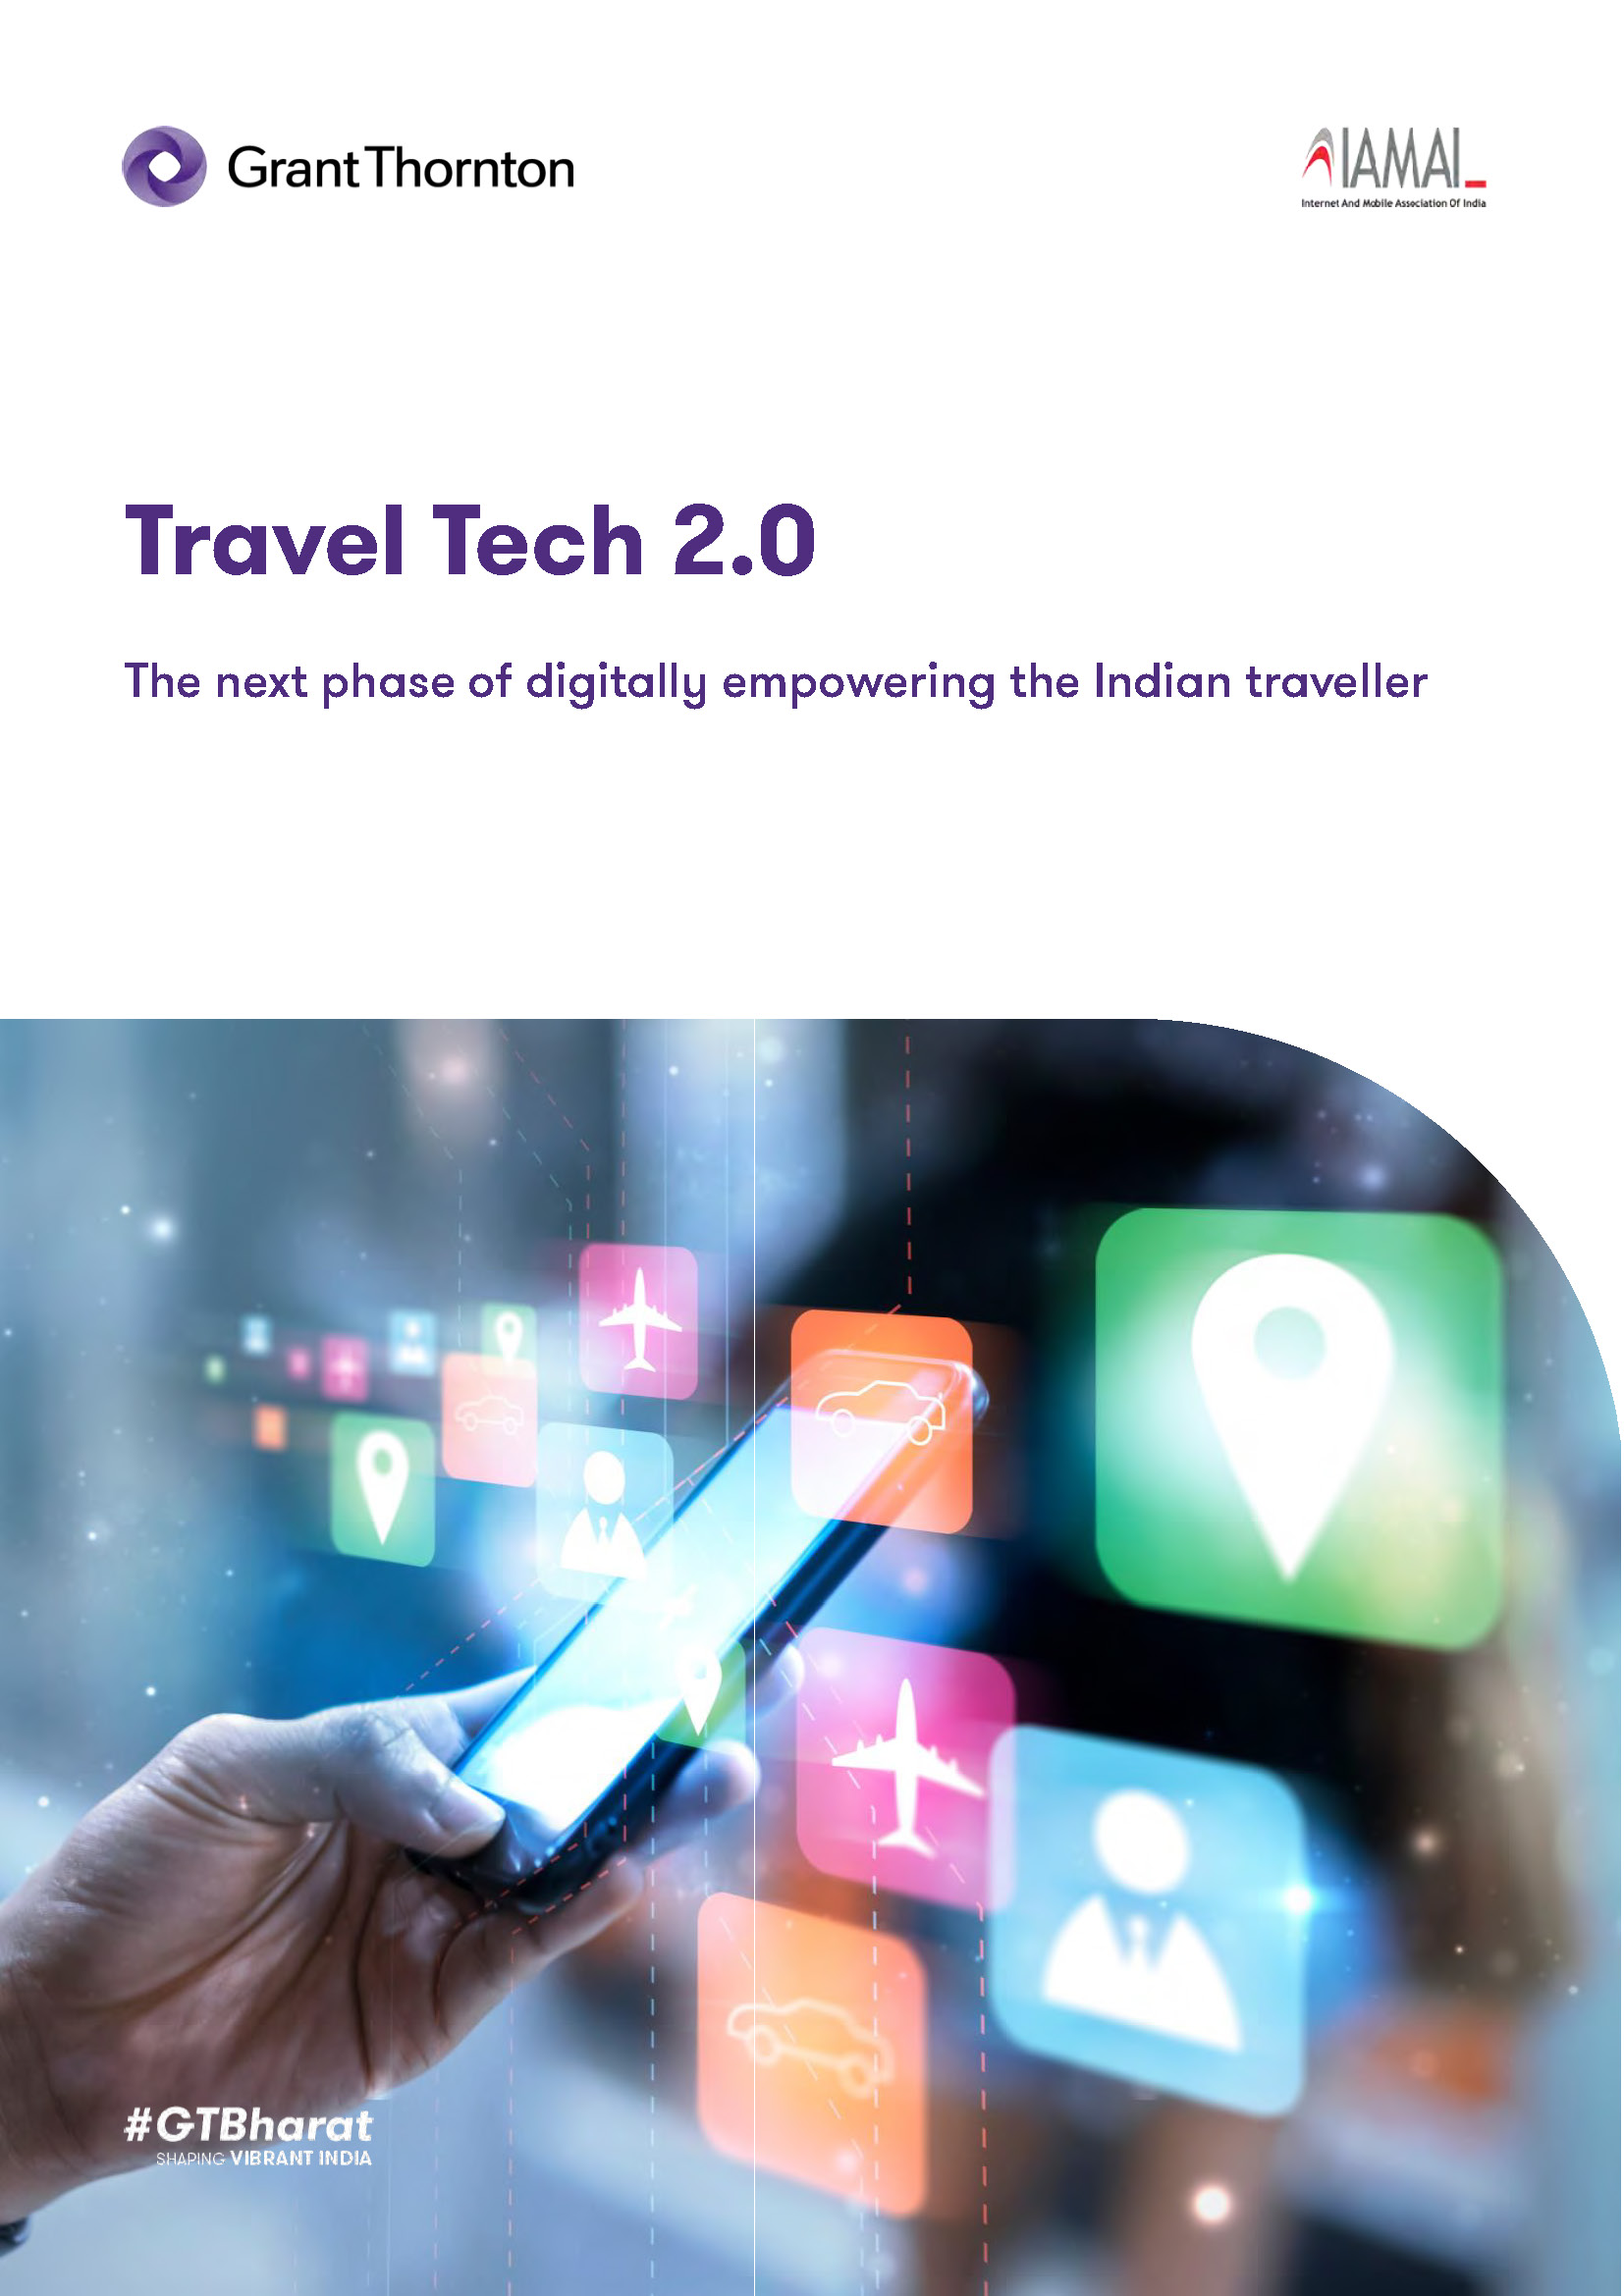 Travel Tech 2.0 The Next phase of digitally empowering the Indian traveller